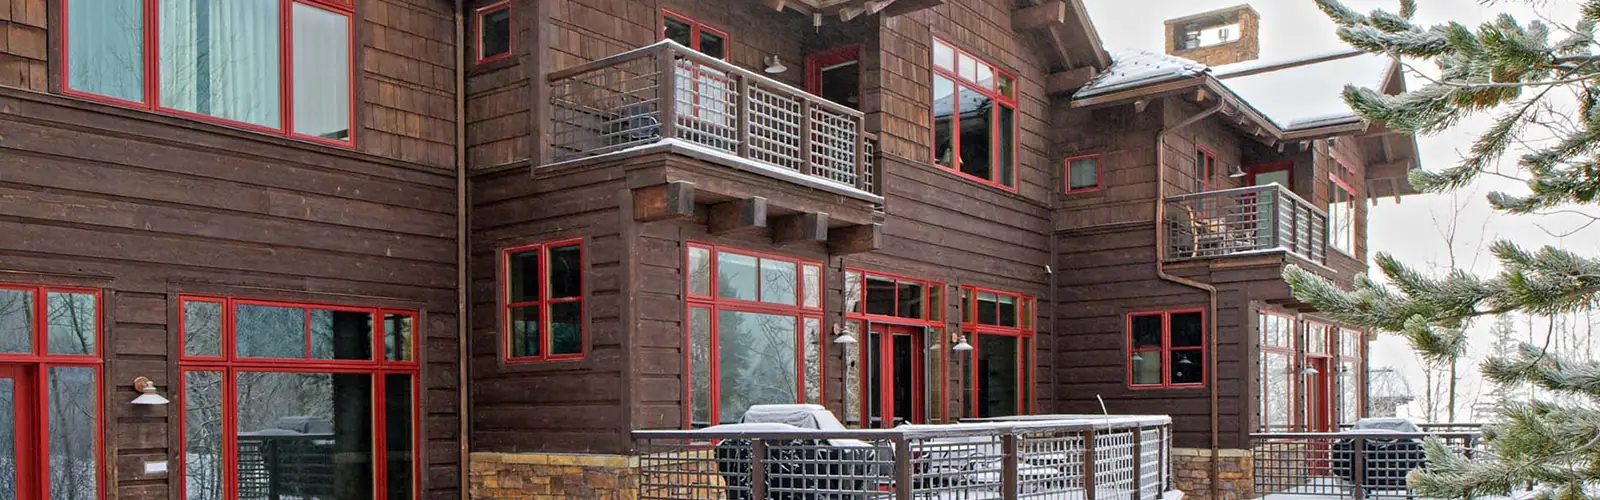 Decks attached to residences in Teton Village, WY.